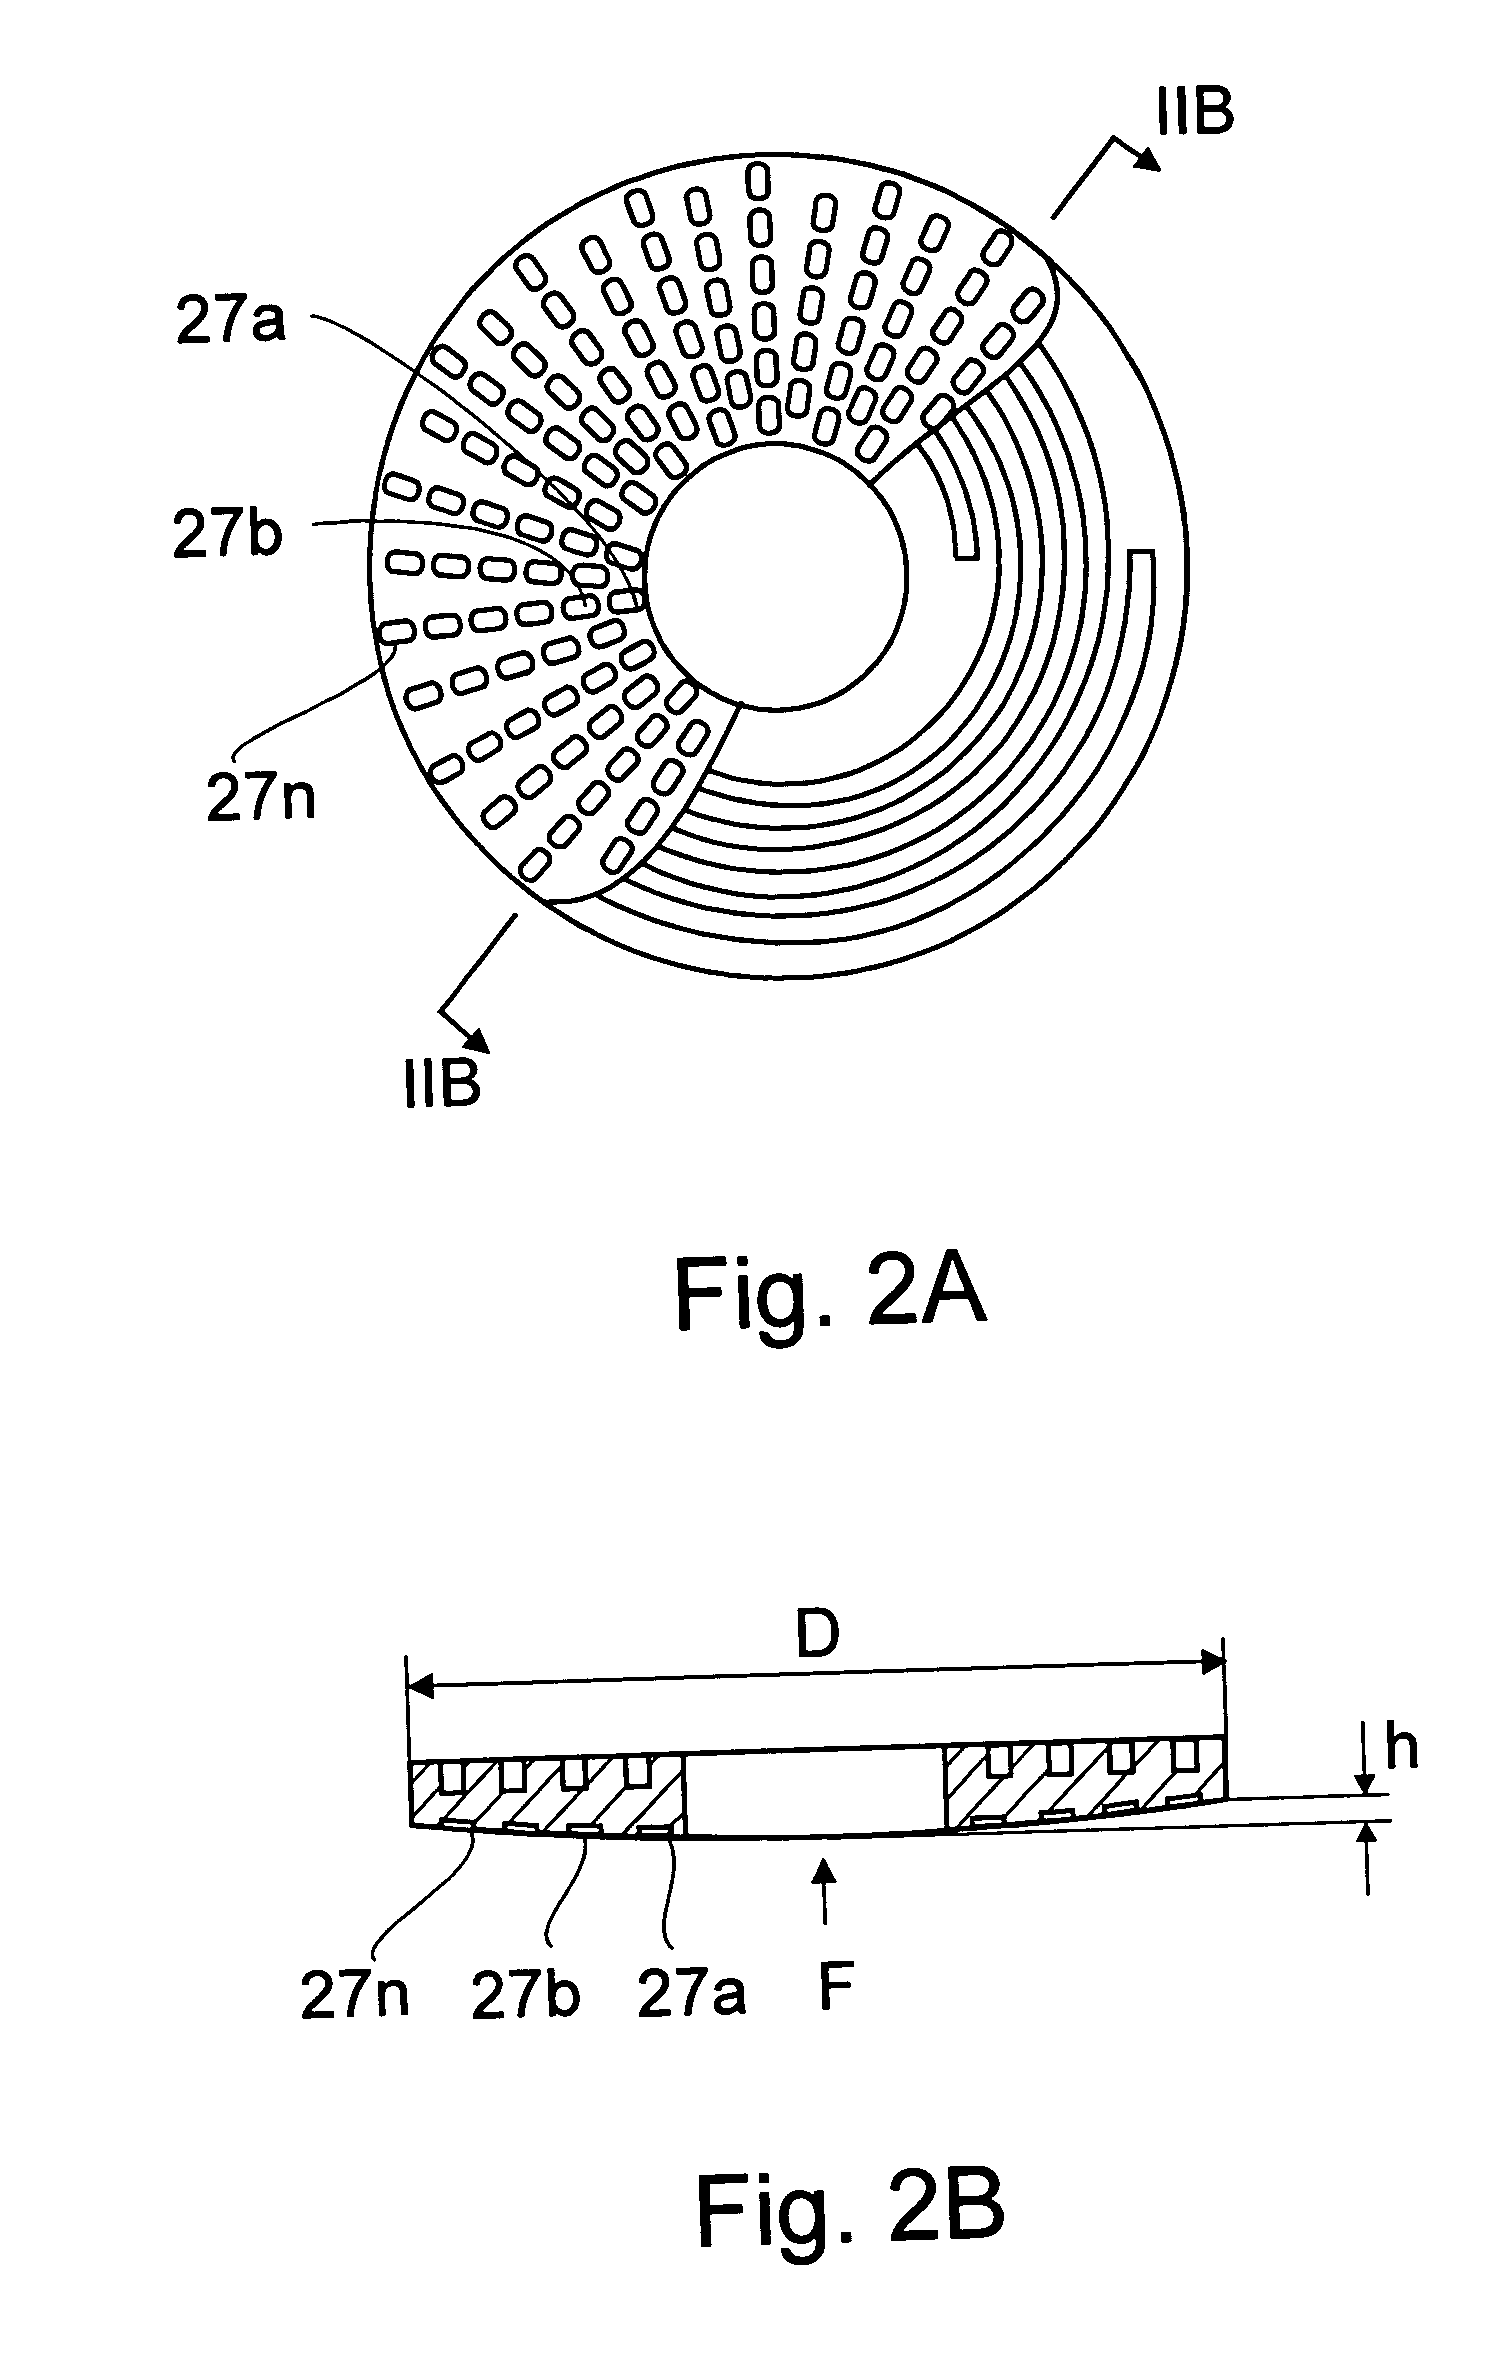 Heat-transfer interface device between a source of heat and a heat-receiving object